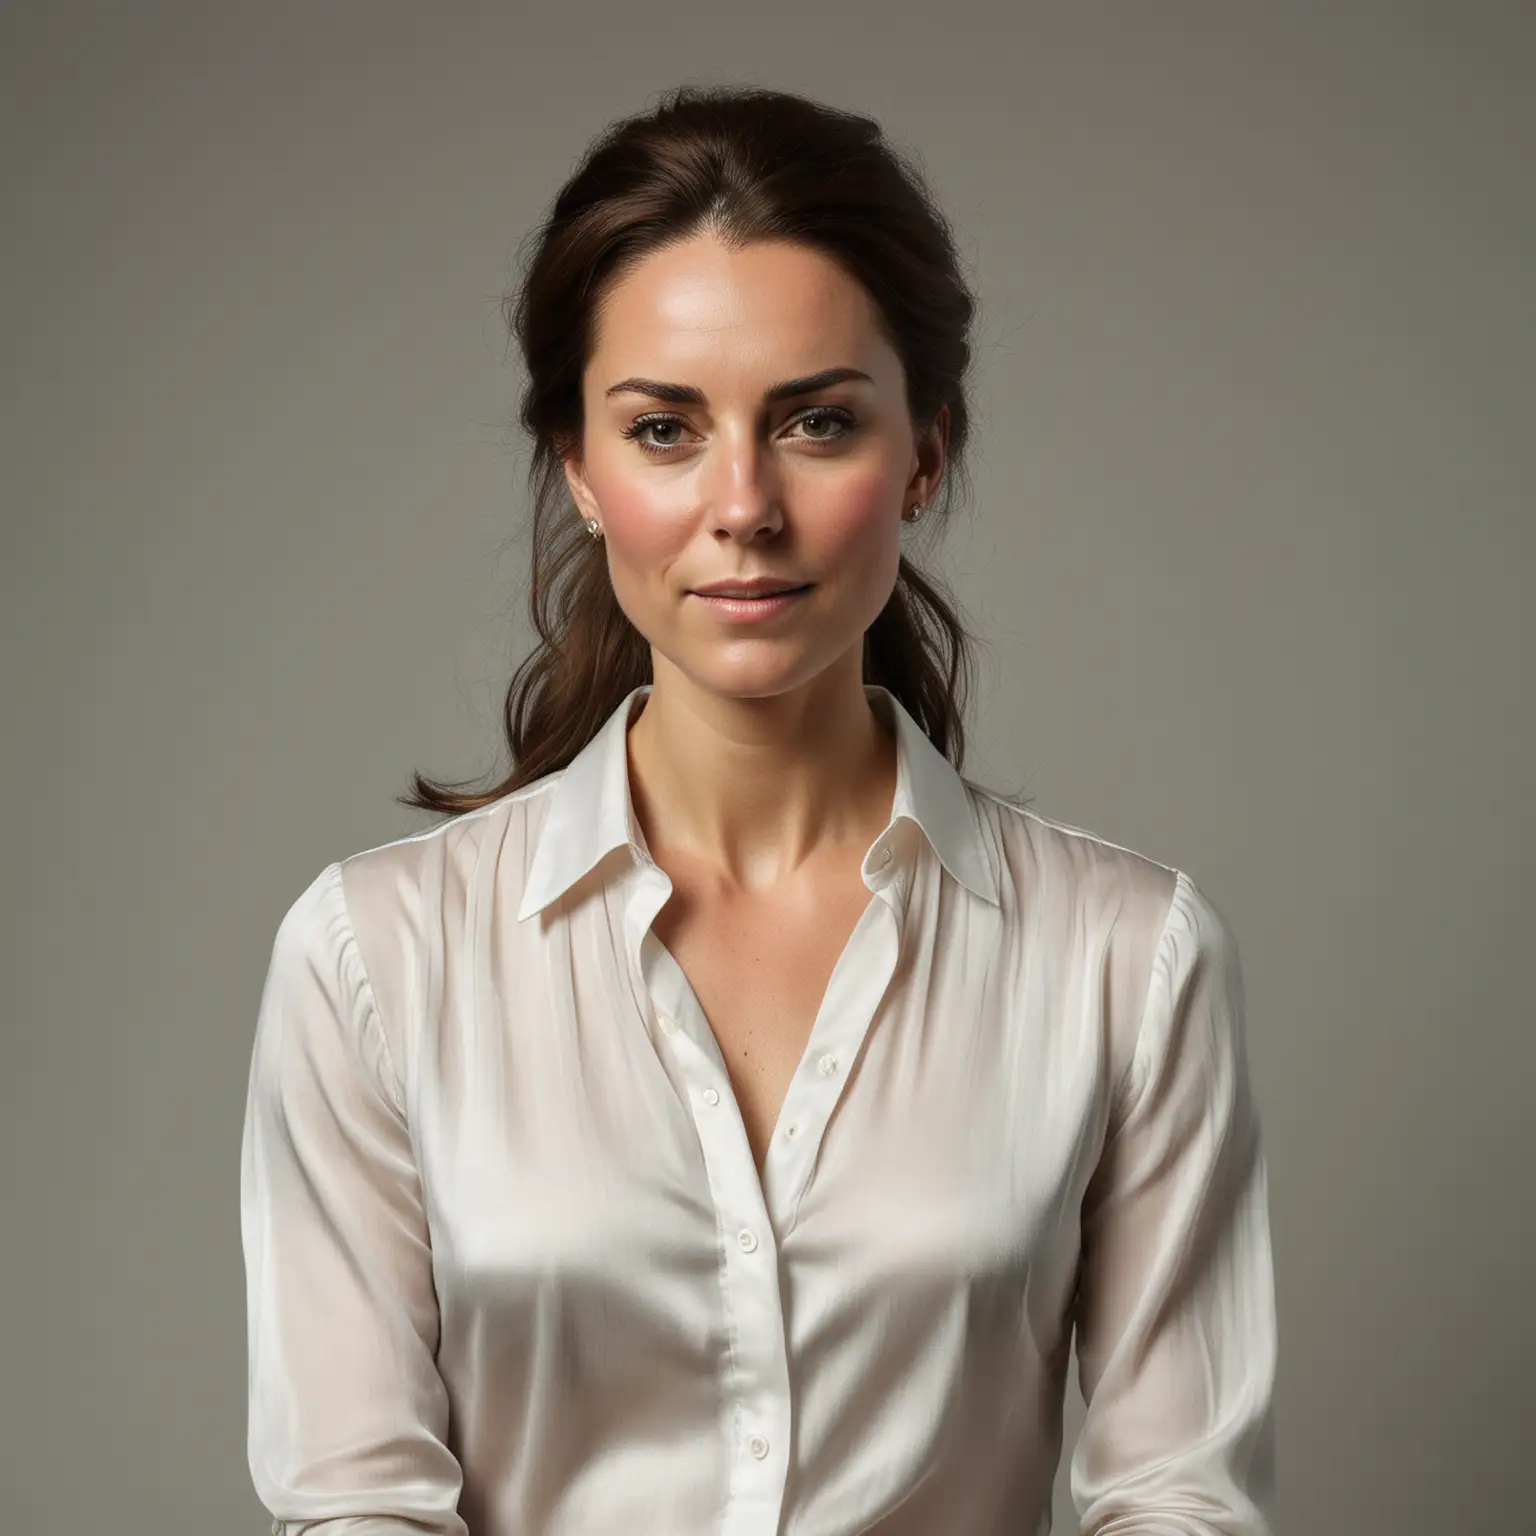 Exhausted Kate Middleton Portrait in Ivory Silk Shirt Front View ID Photo on Gray Background